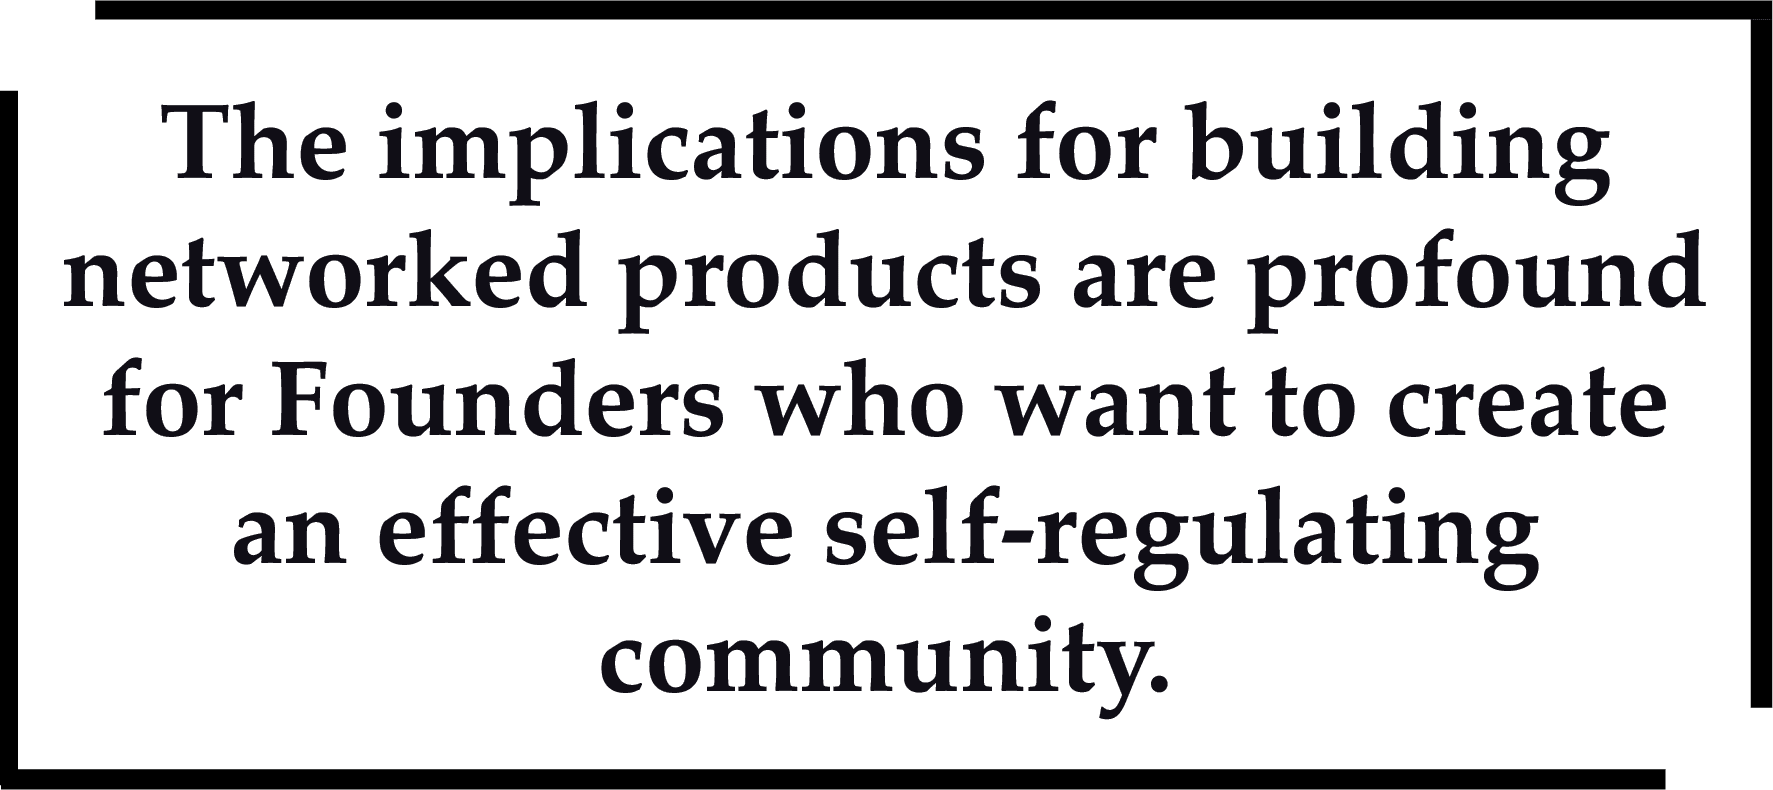 The implications for building networked products are profound for Founders who want to create an effective self-regulating community.